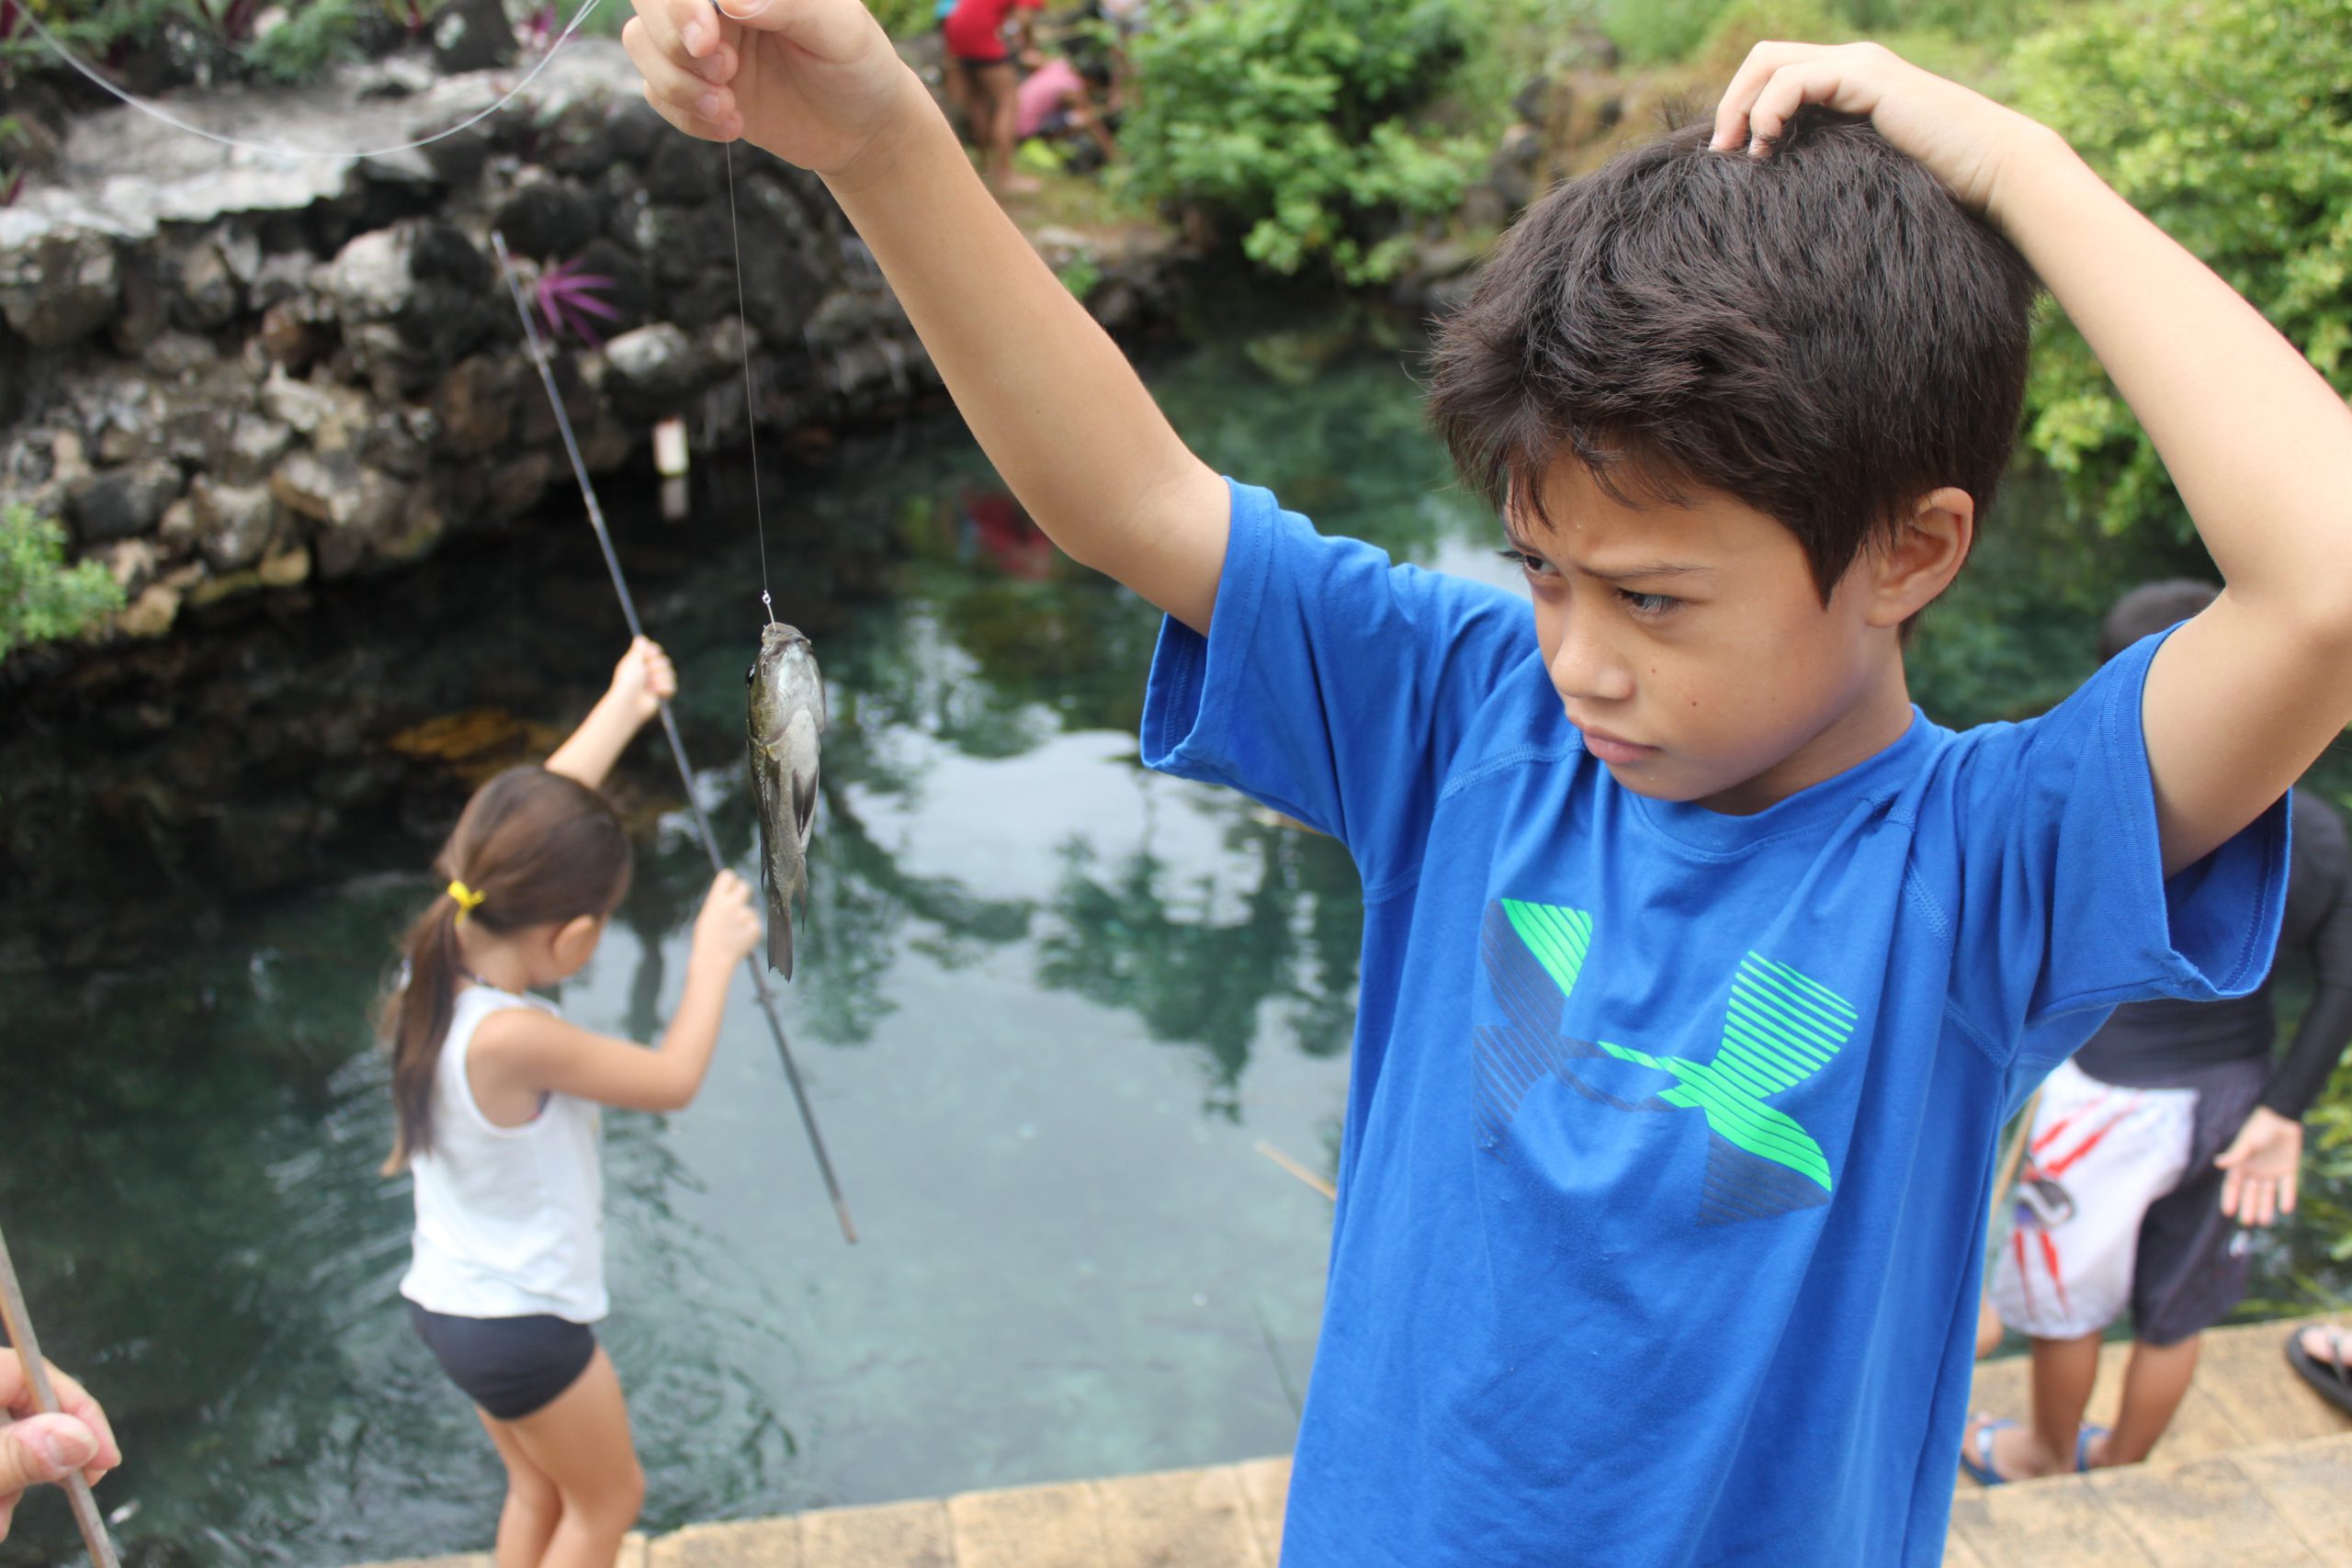 A boy looks at a fish on a pole